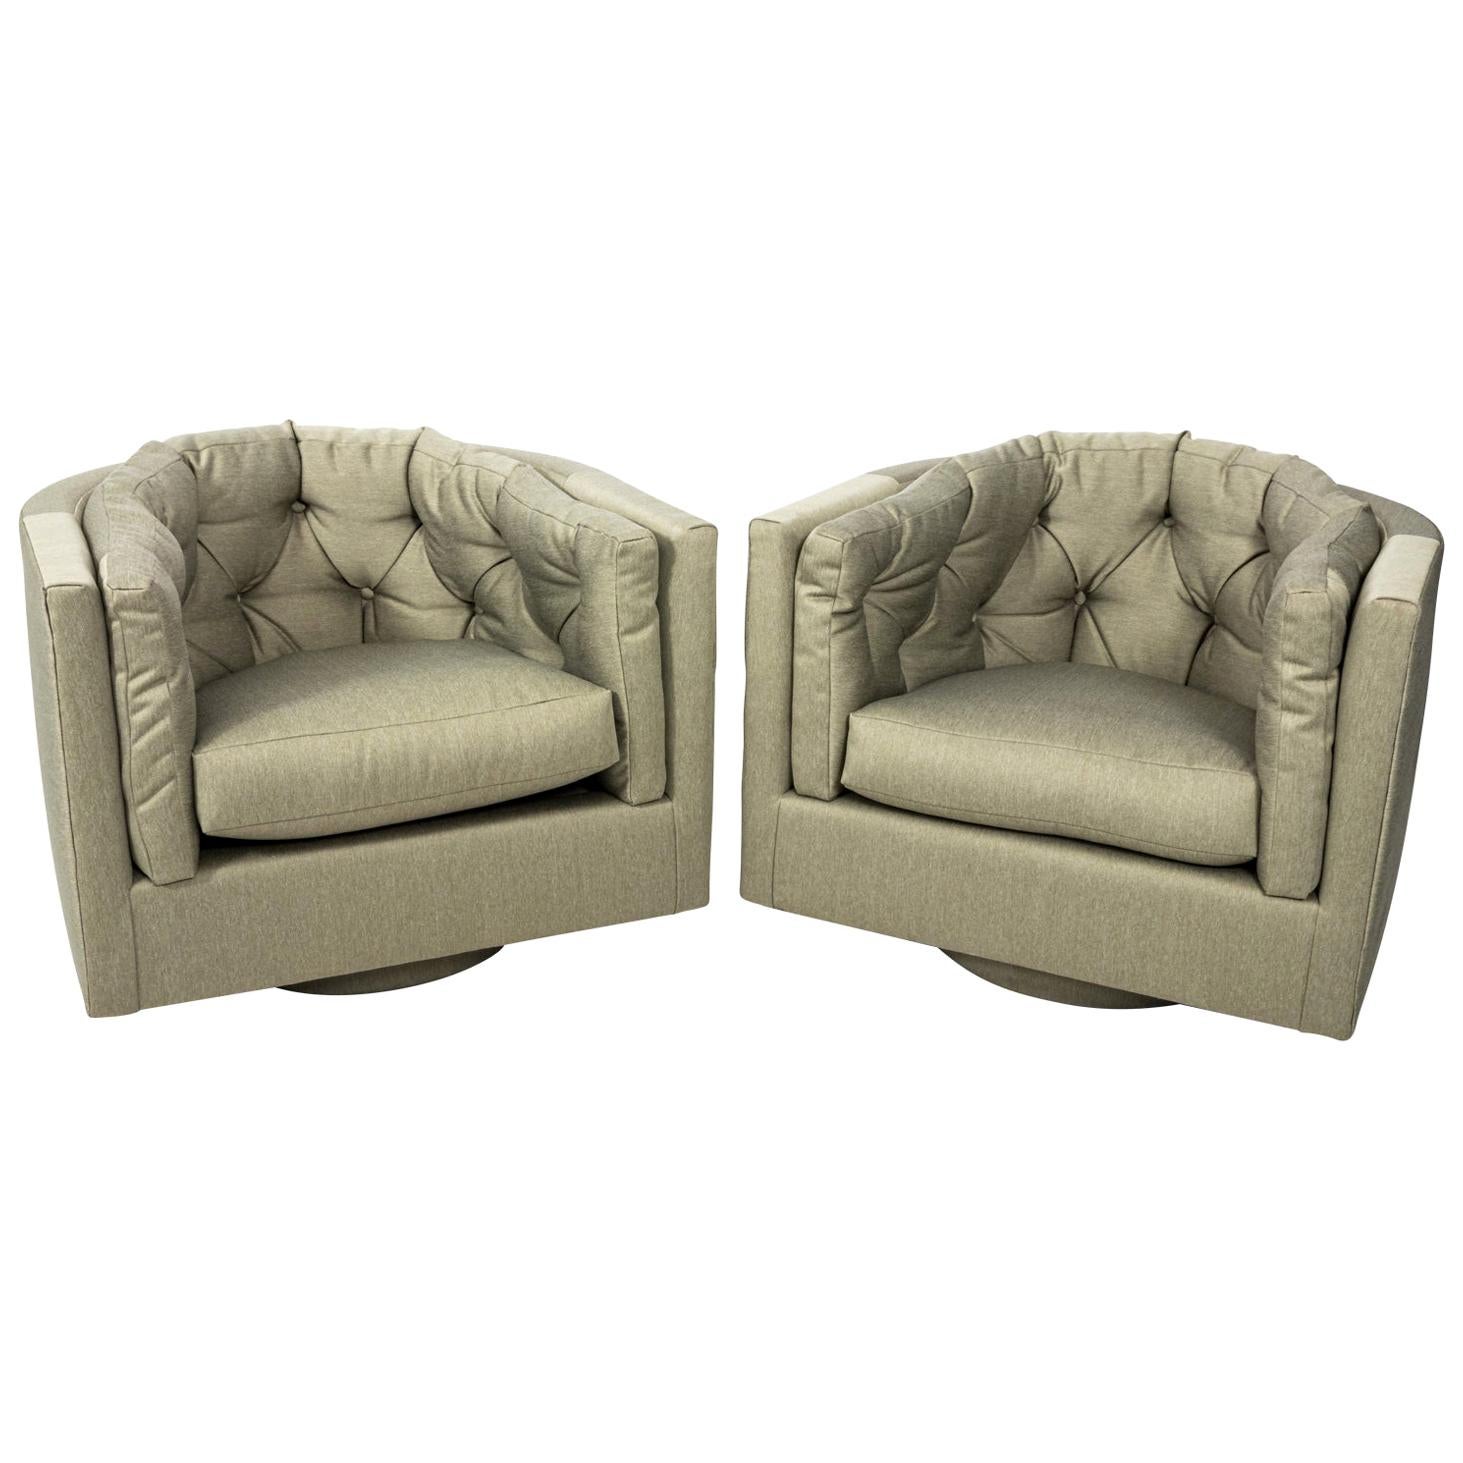 Pair of Upholstered Swivel Armchairs